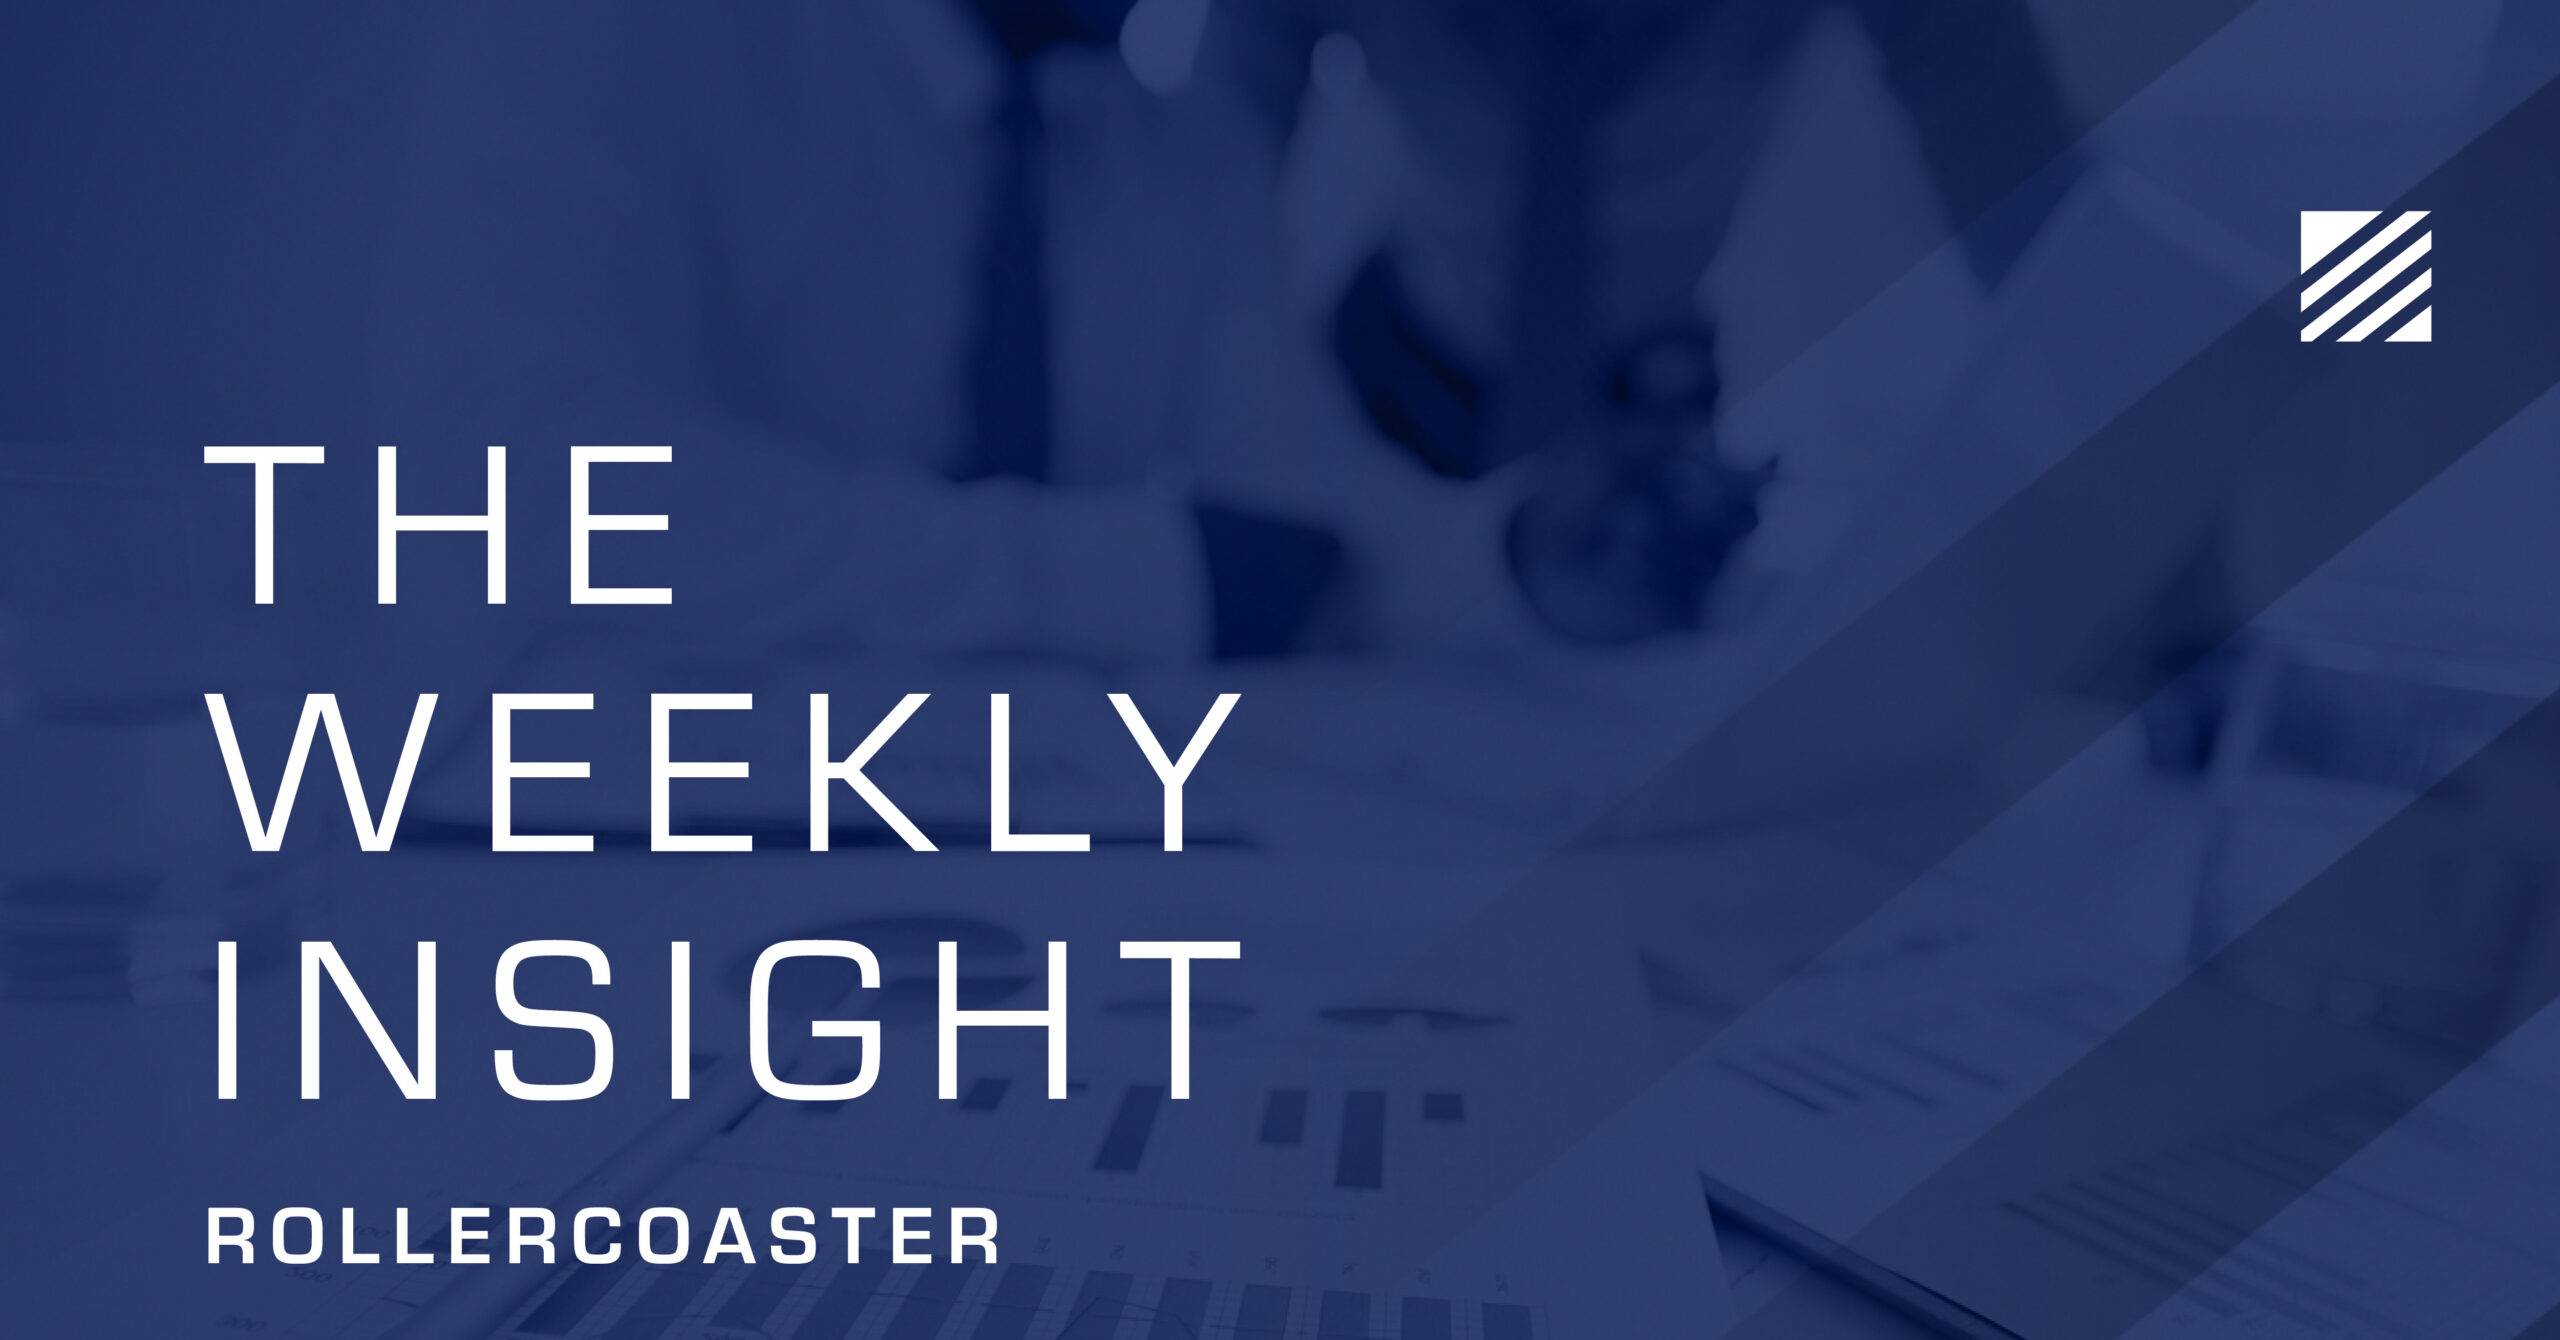 The Weekly Insight: Rollercoaster Graphic